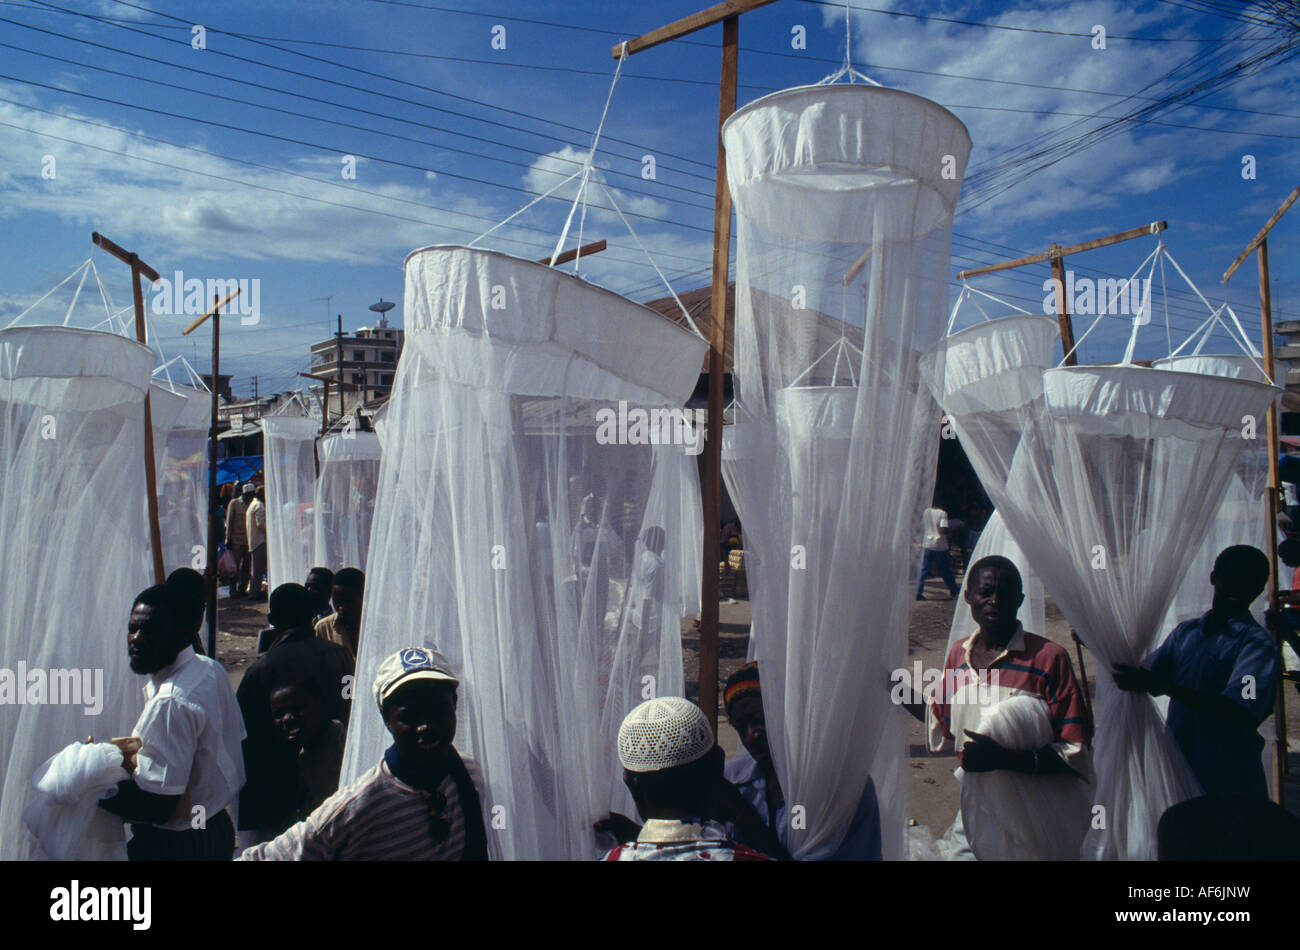 TANZANIA East Africa Dar es Salaam Mosquito nets for sale at market with men in the foreground Stock Photo